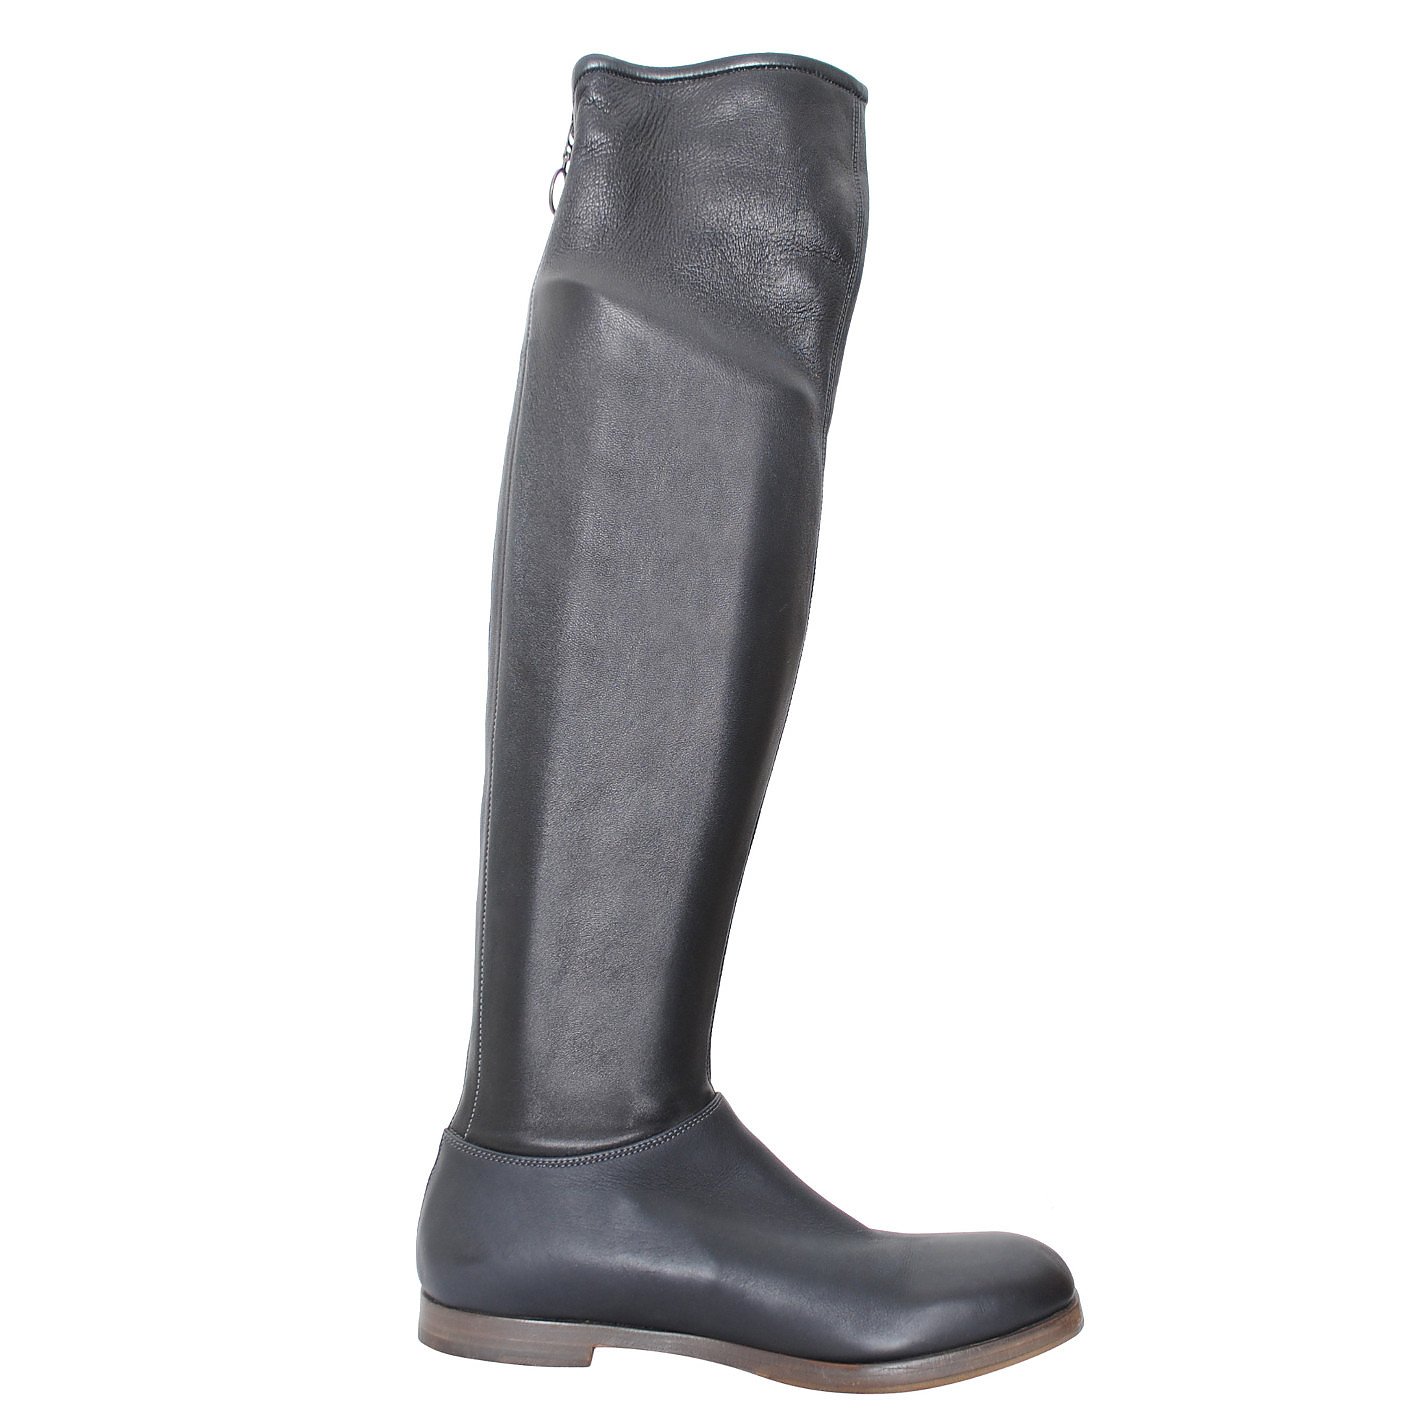 Fausto Santini Over-The-Knee Leather Boots